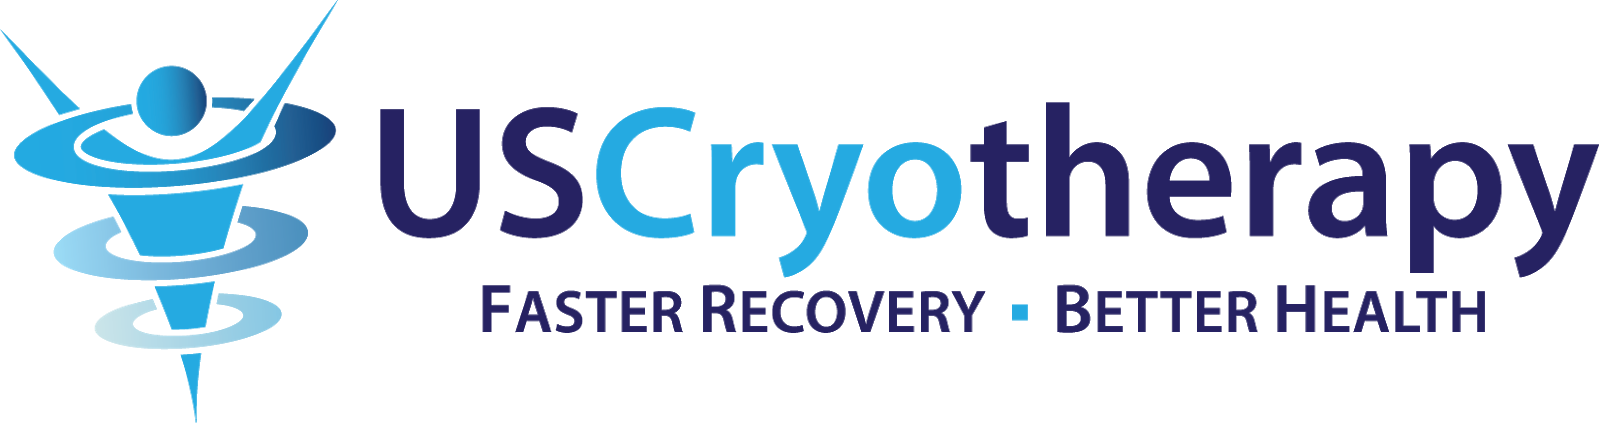 US Cryotherapy